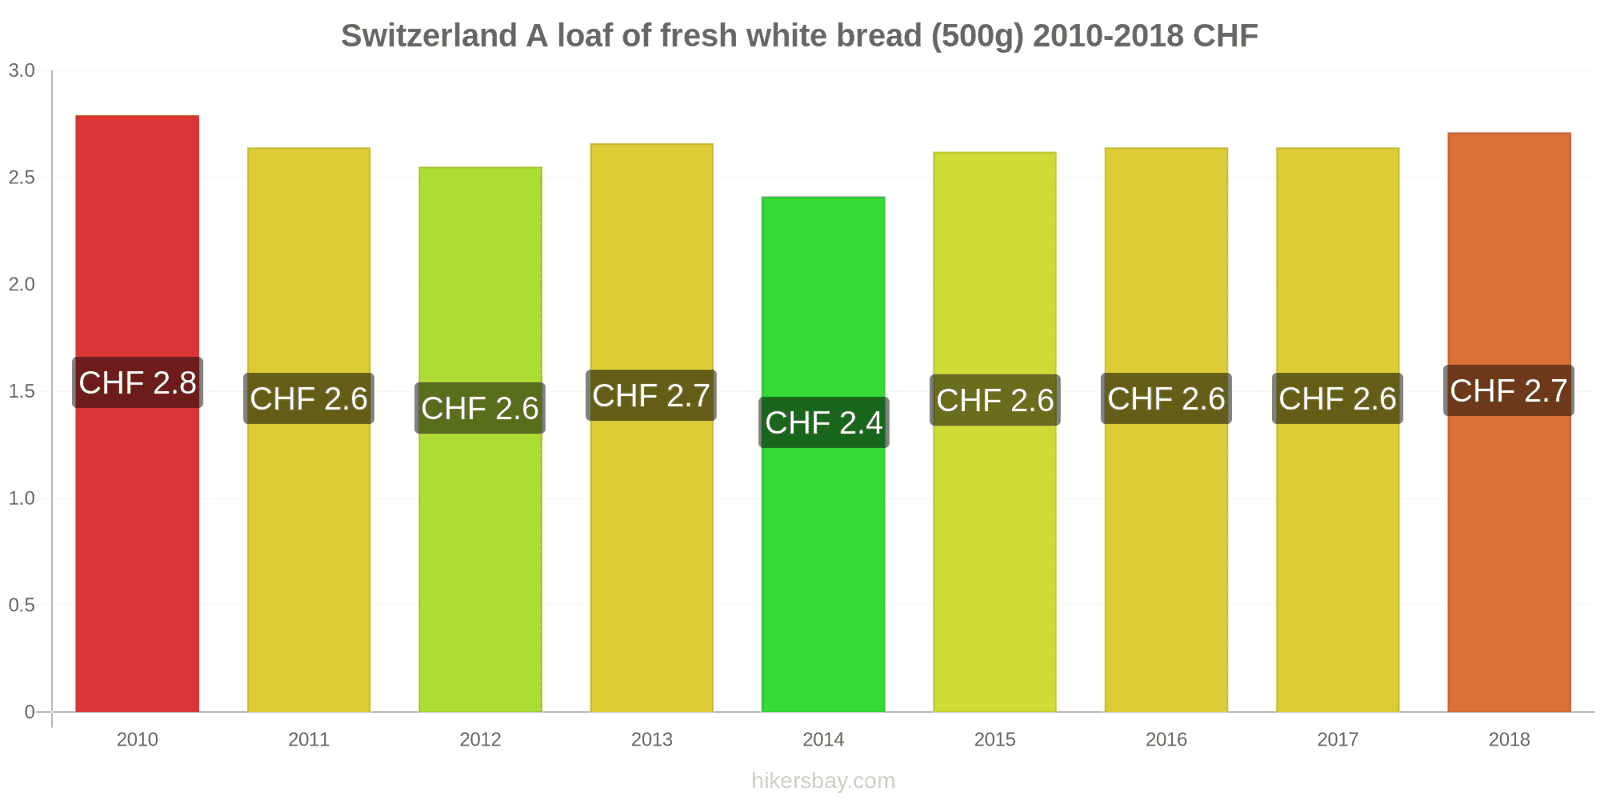 Switzerland price changes A loaf of fresh white bread (500g) hikersbay.com